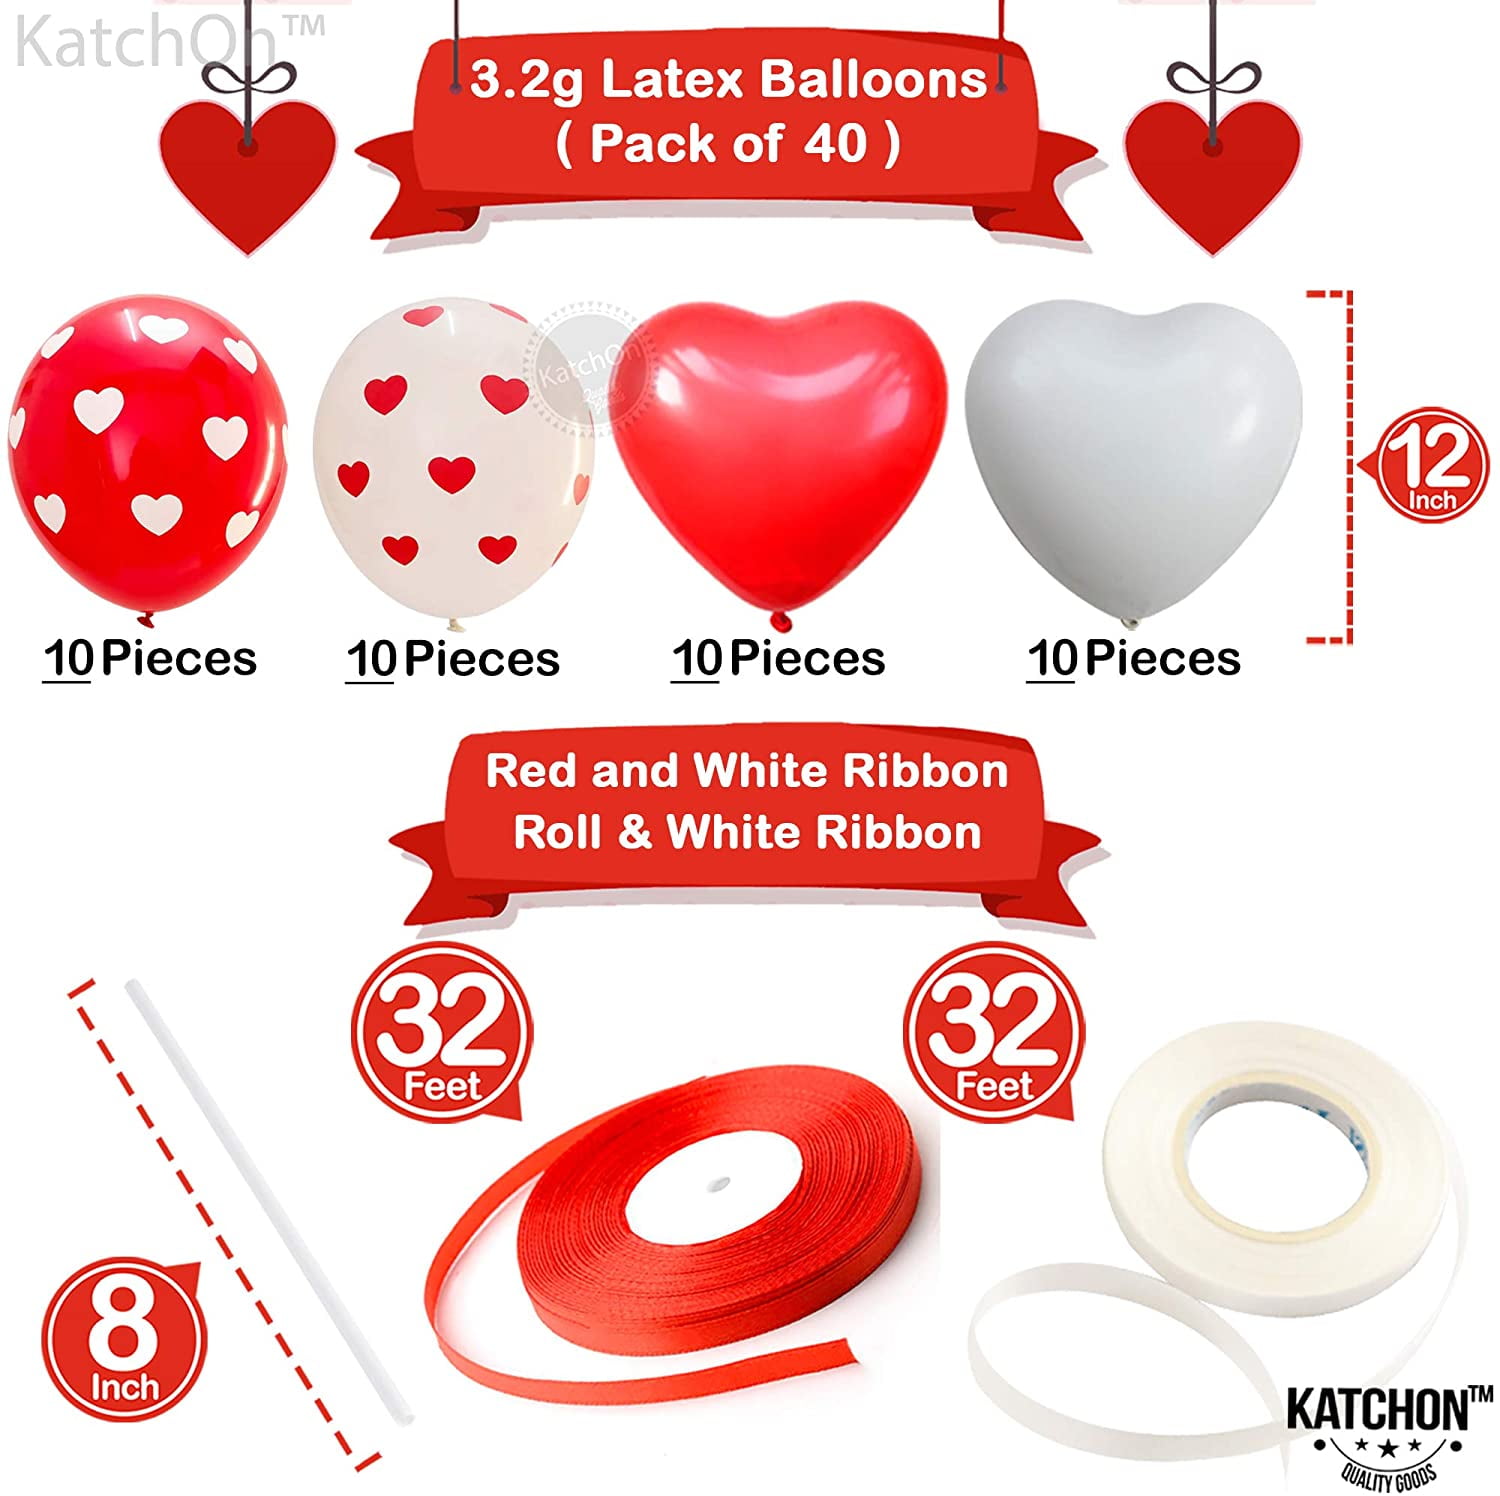 Valentine Balloons Pack of 40 Ballons KATCHON Heart Balloons Decorations Kit for Valentines Day Heart Printed Latex Balloons Valentines Day Decorations Heart Shape Latex Balloons